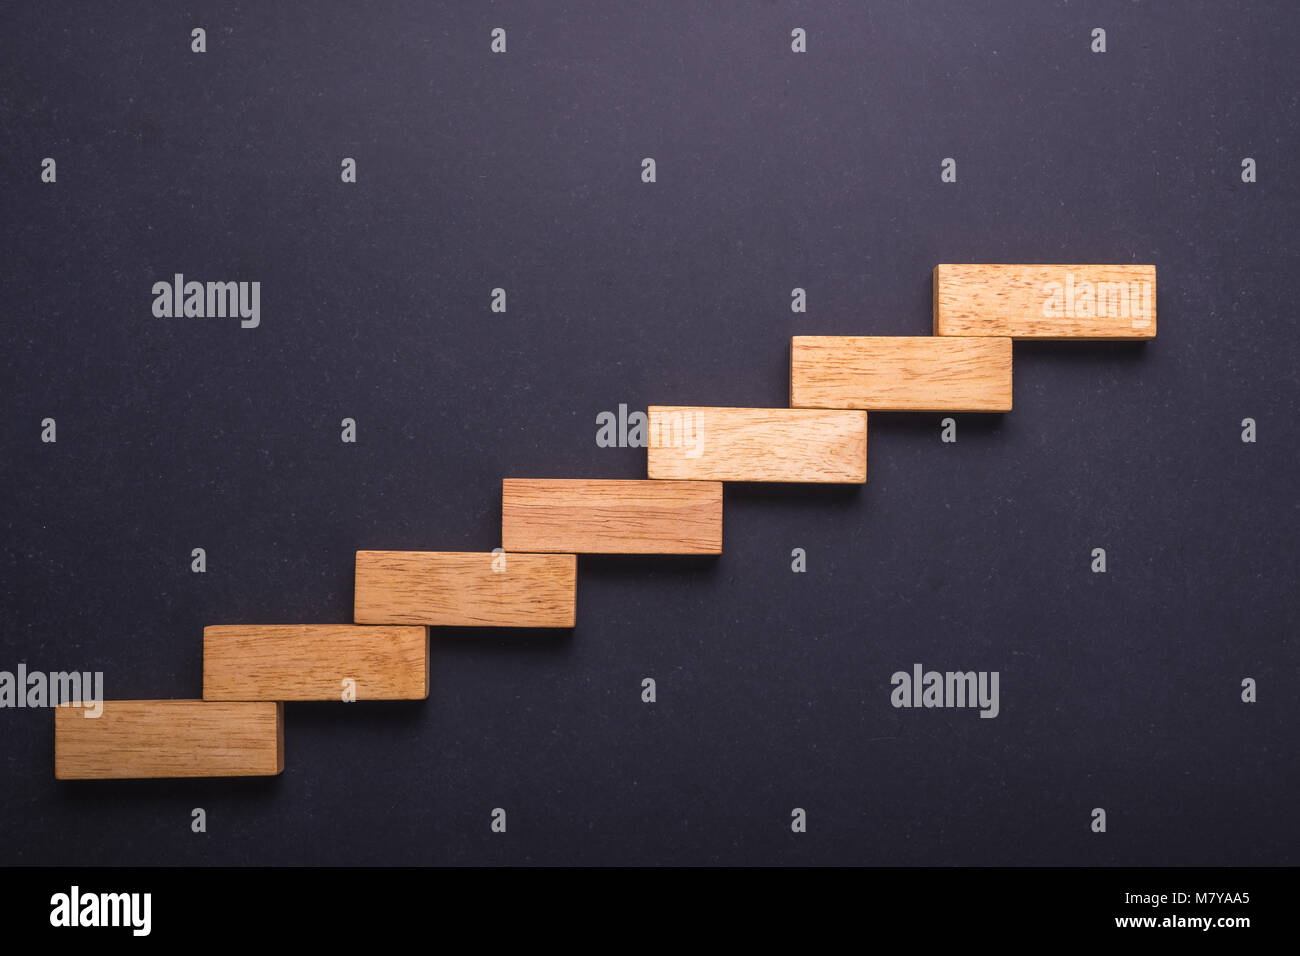 Top view wooden block set up for staircase on black stone board. Business concept for growth success process. Stock Photo